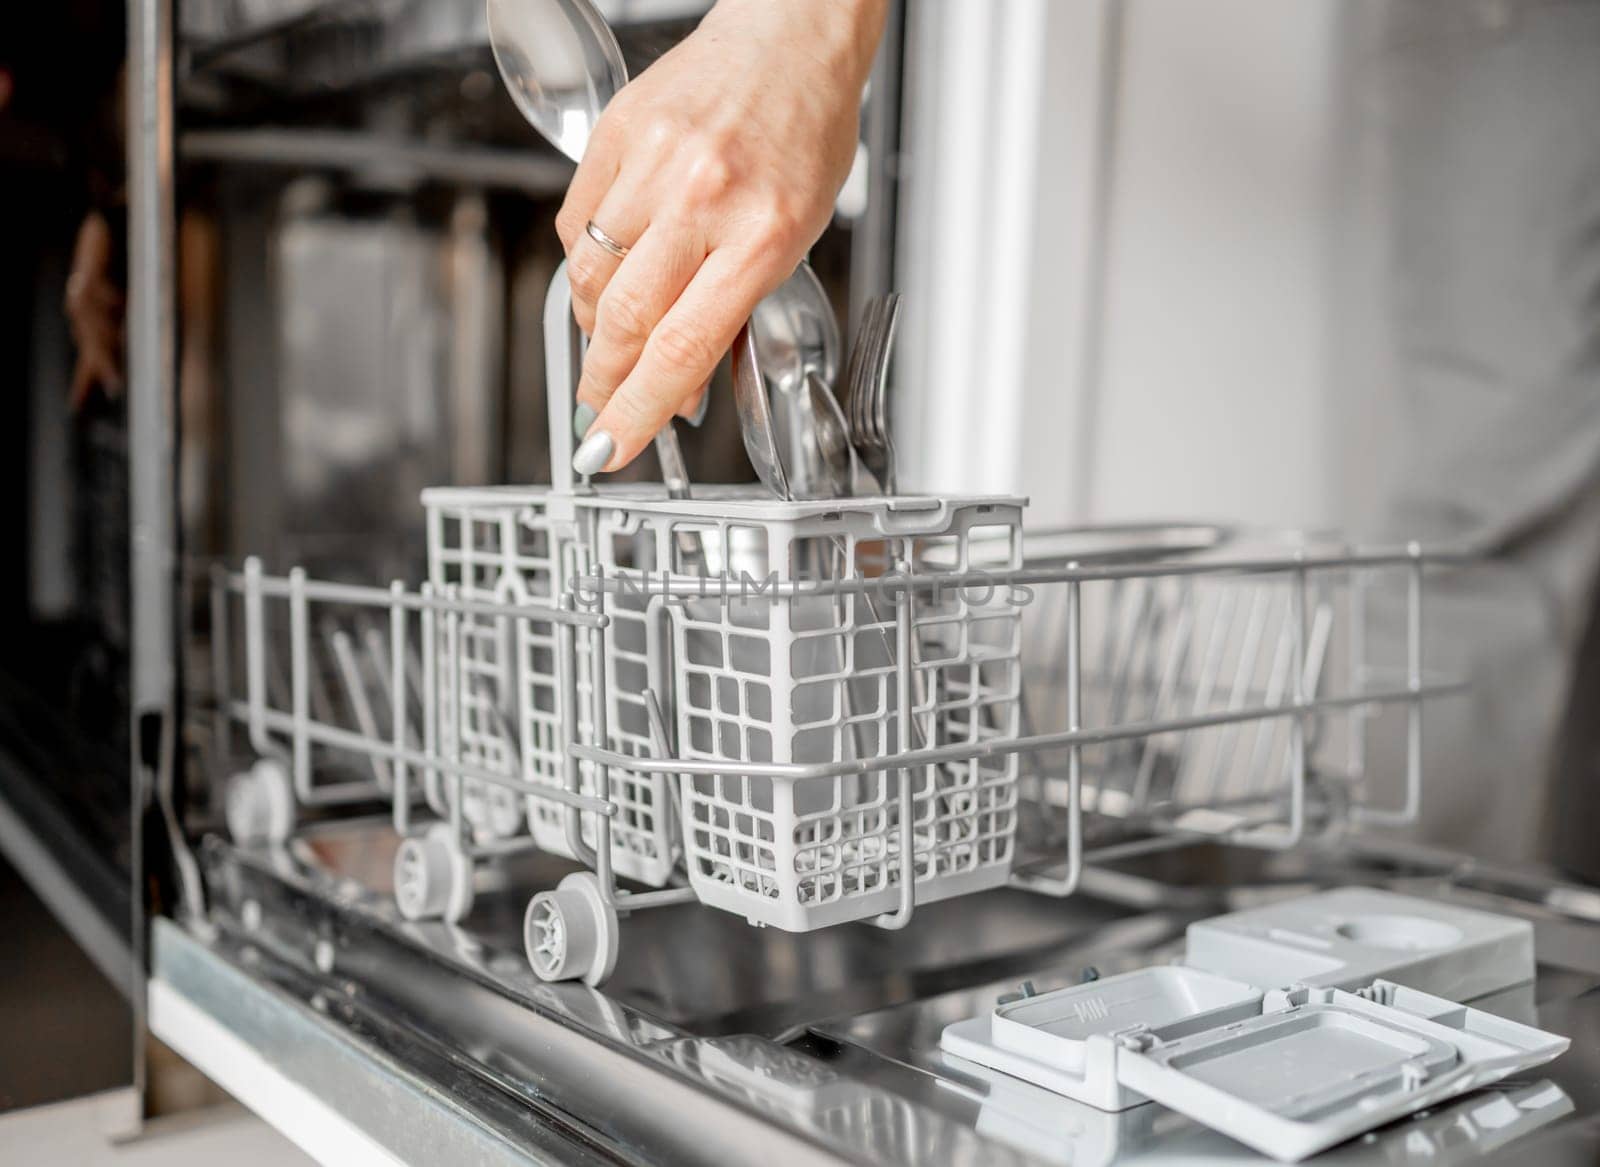 Young Woman Is Loading Spoons Into Dishwasher In Close-Up View